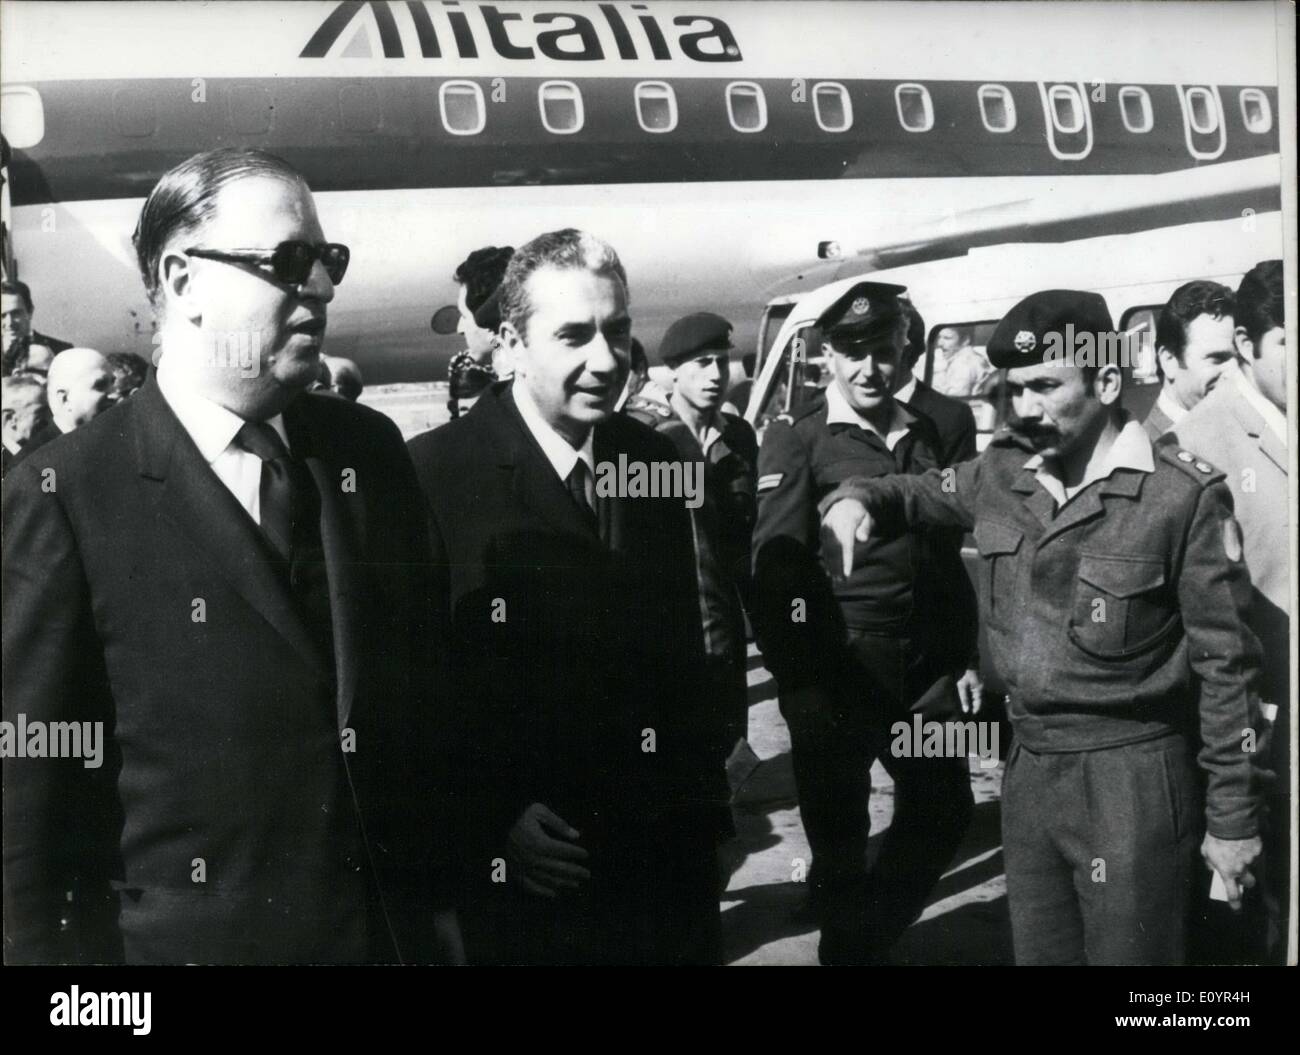 Mar. 09, 1971 - For the first time, Italy's Minister of Foreign Affairs, Mr. Aldo Moro, was received in Israel. Mr. Aldo Moro ad Mr. Abba Eban, his Israeli counterpart (left) are pictured at the Lod airport. Stock Photo